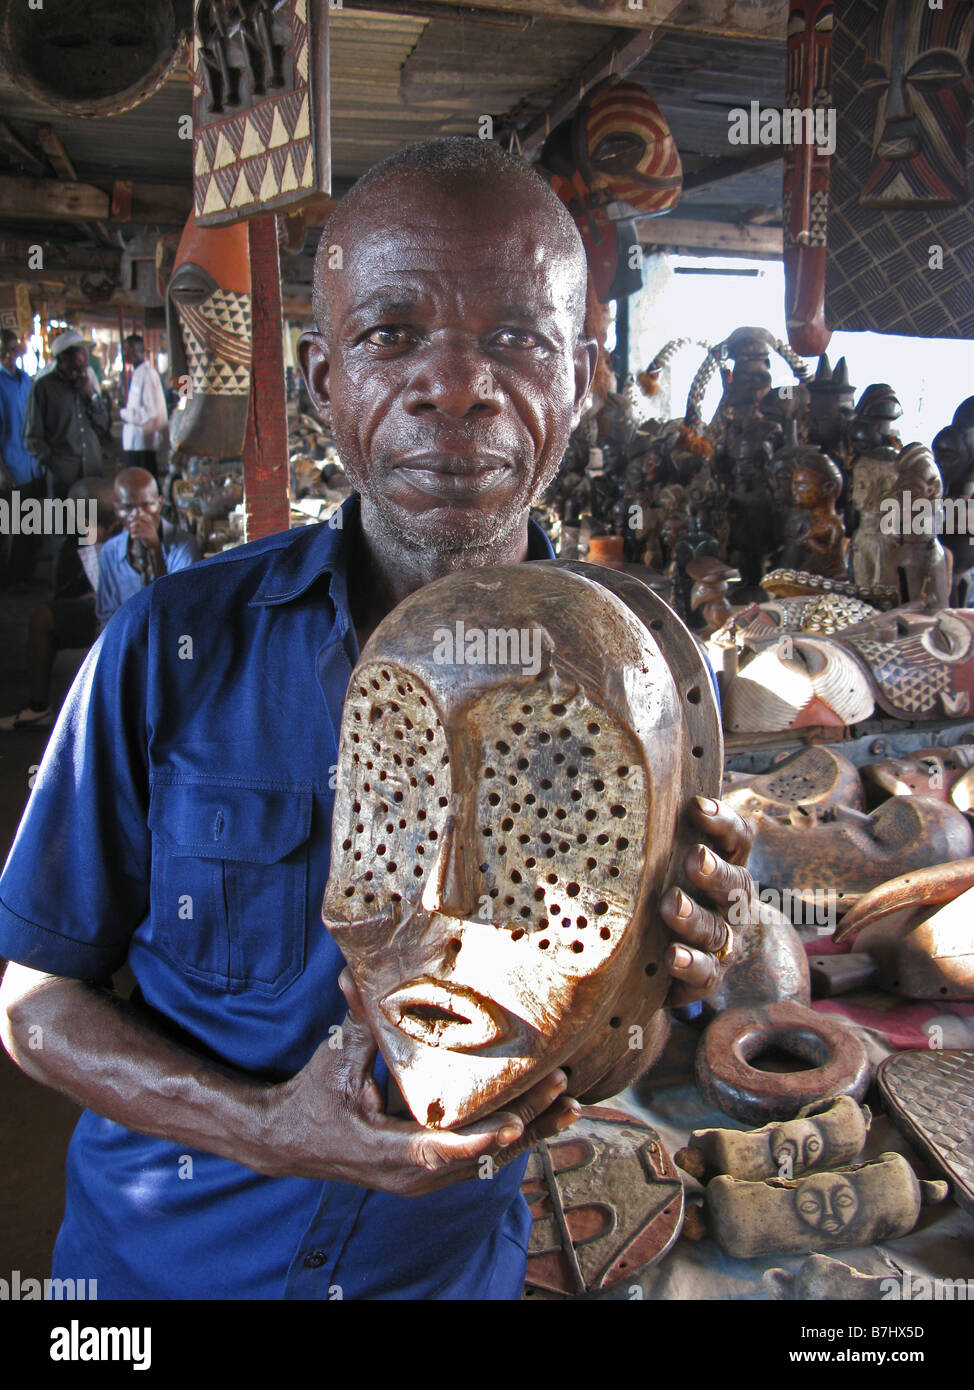 Elderly African man selling Congolese traditional masks in Old antiques market in Kinshasa Democratic Republic of Congo Stock Photo